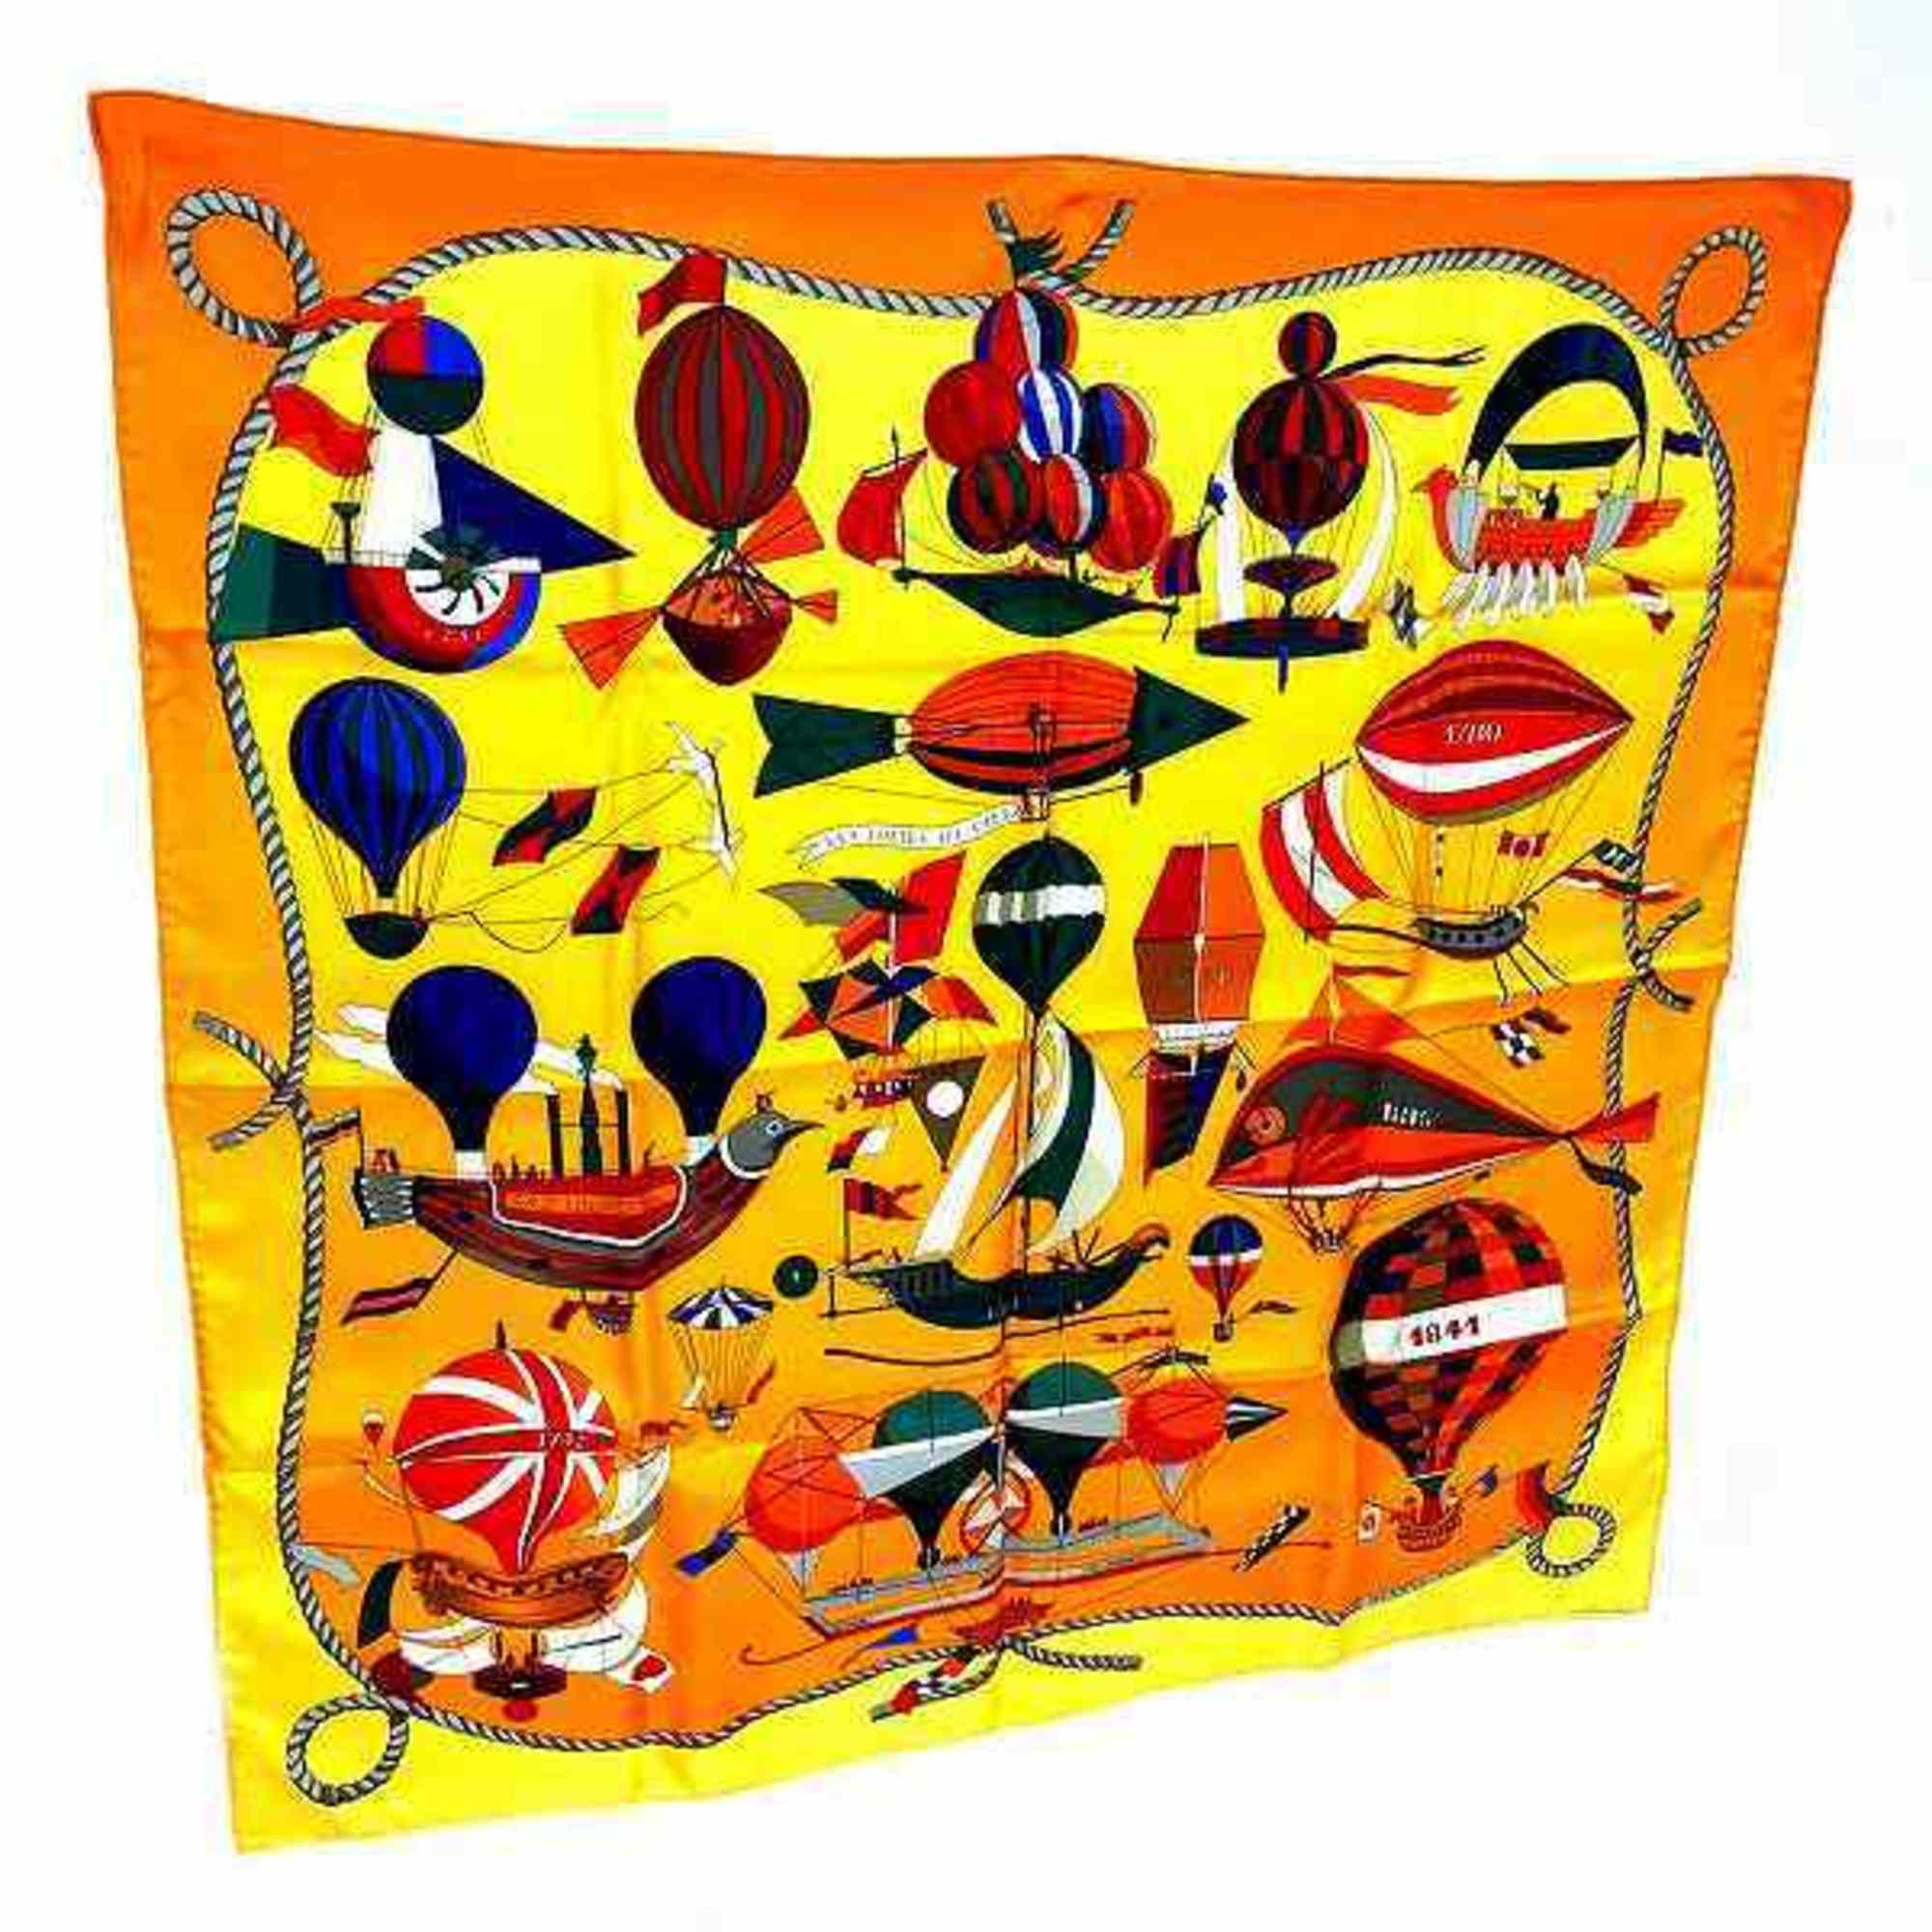 Hermes Carre 90 Madness of the Sky Brand Accessories Muffler/Scarf Women's